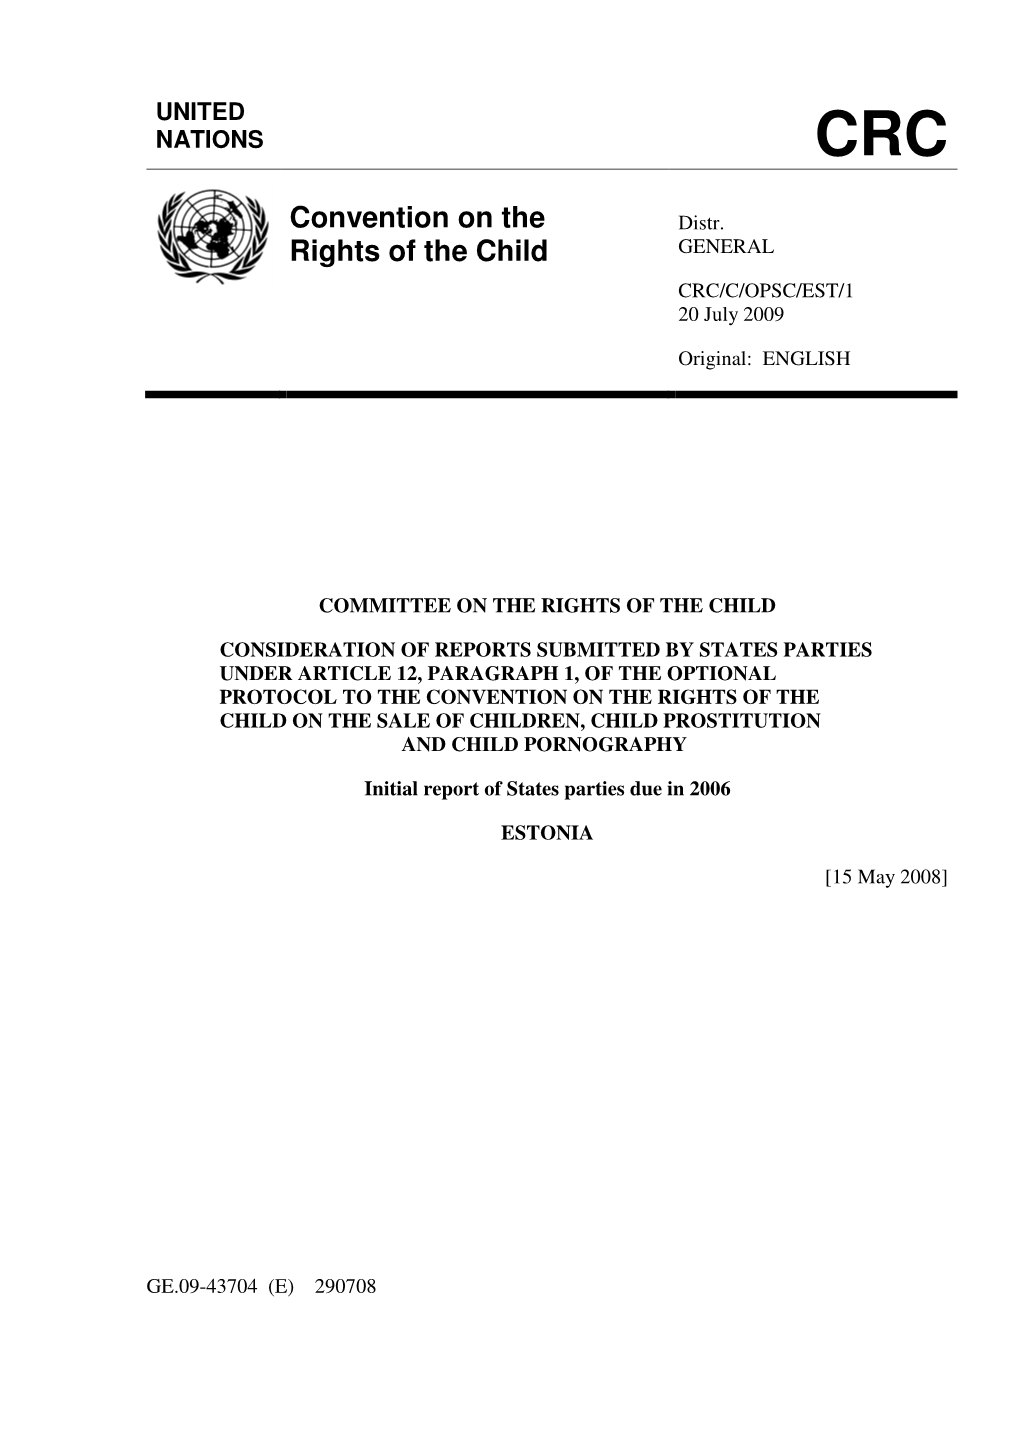 Convention on the Rights of the Child on the Sale of Children, Child Prostitution and Child Pornography